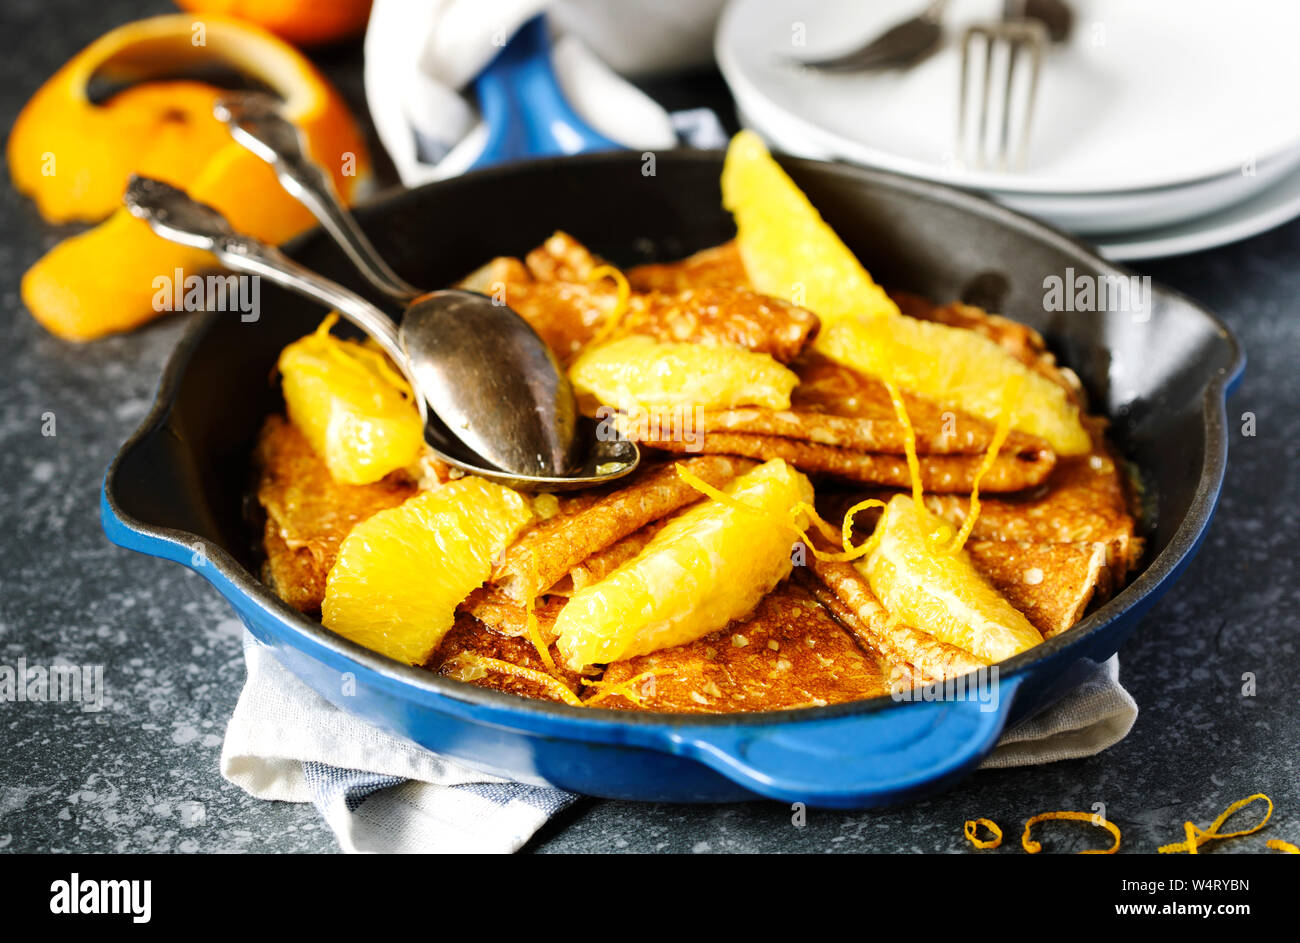 Crepes Suzette in a frying pan Stock Photo